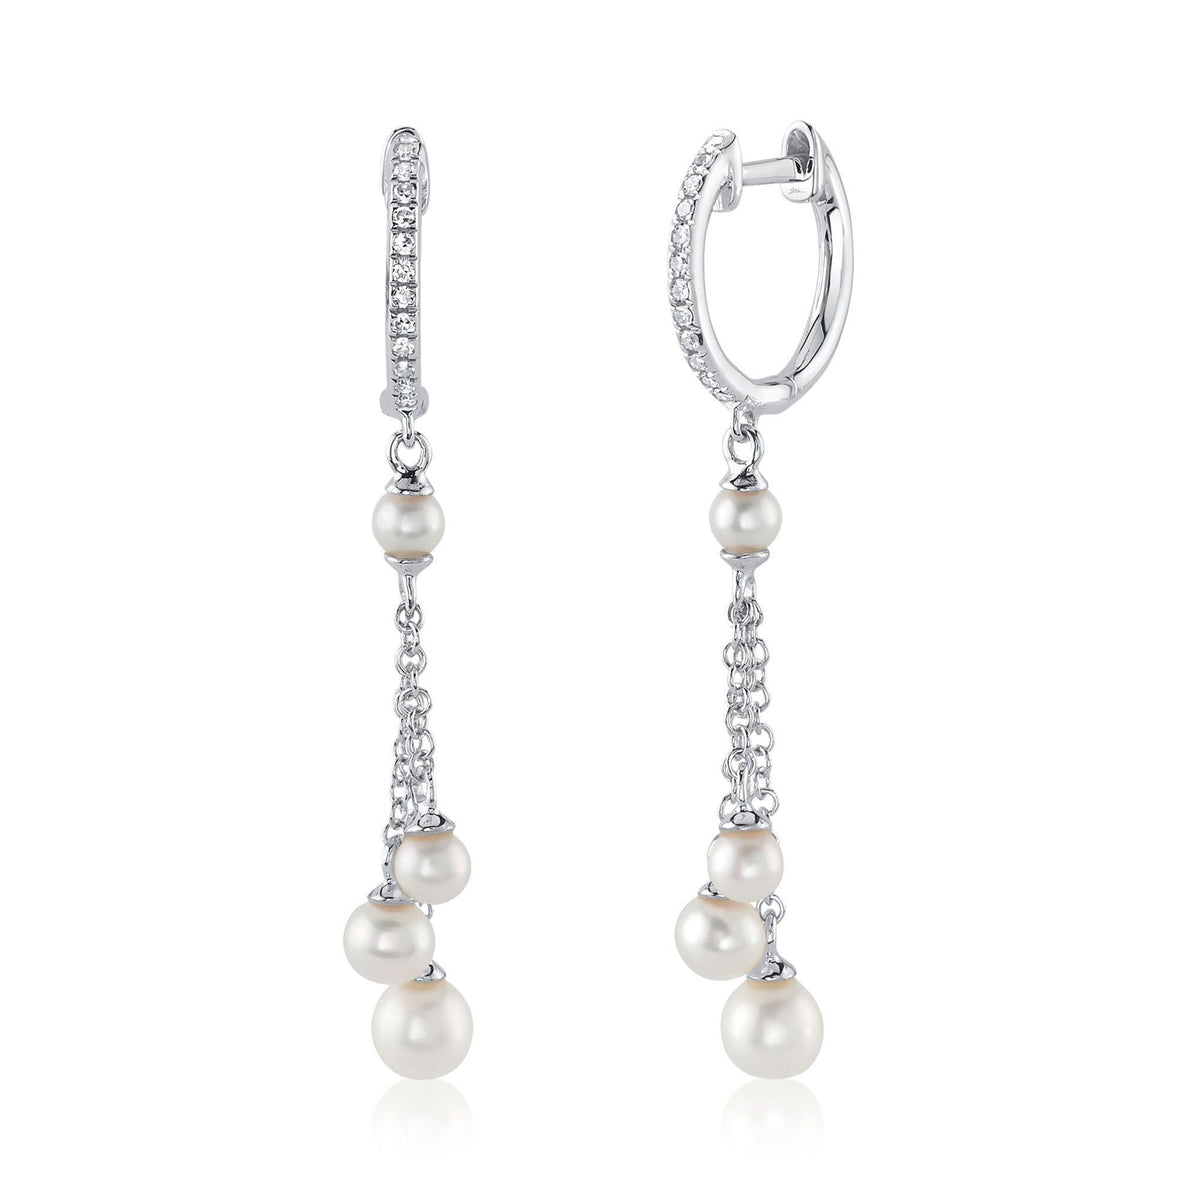 14Kt White Gold Dangle Earrings With 2-3mm Cultured Pearls